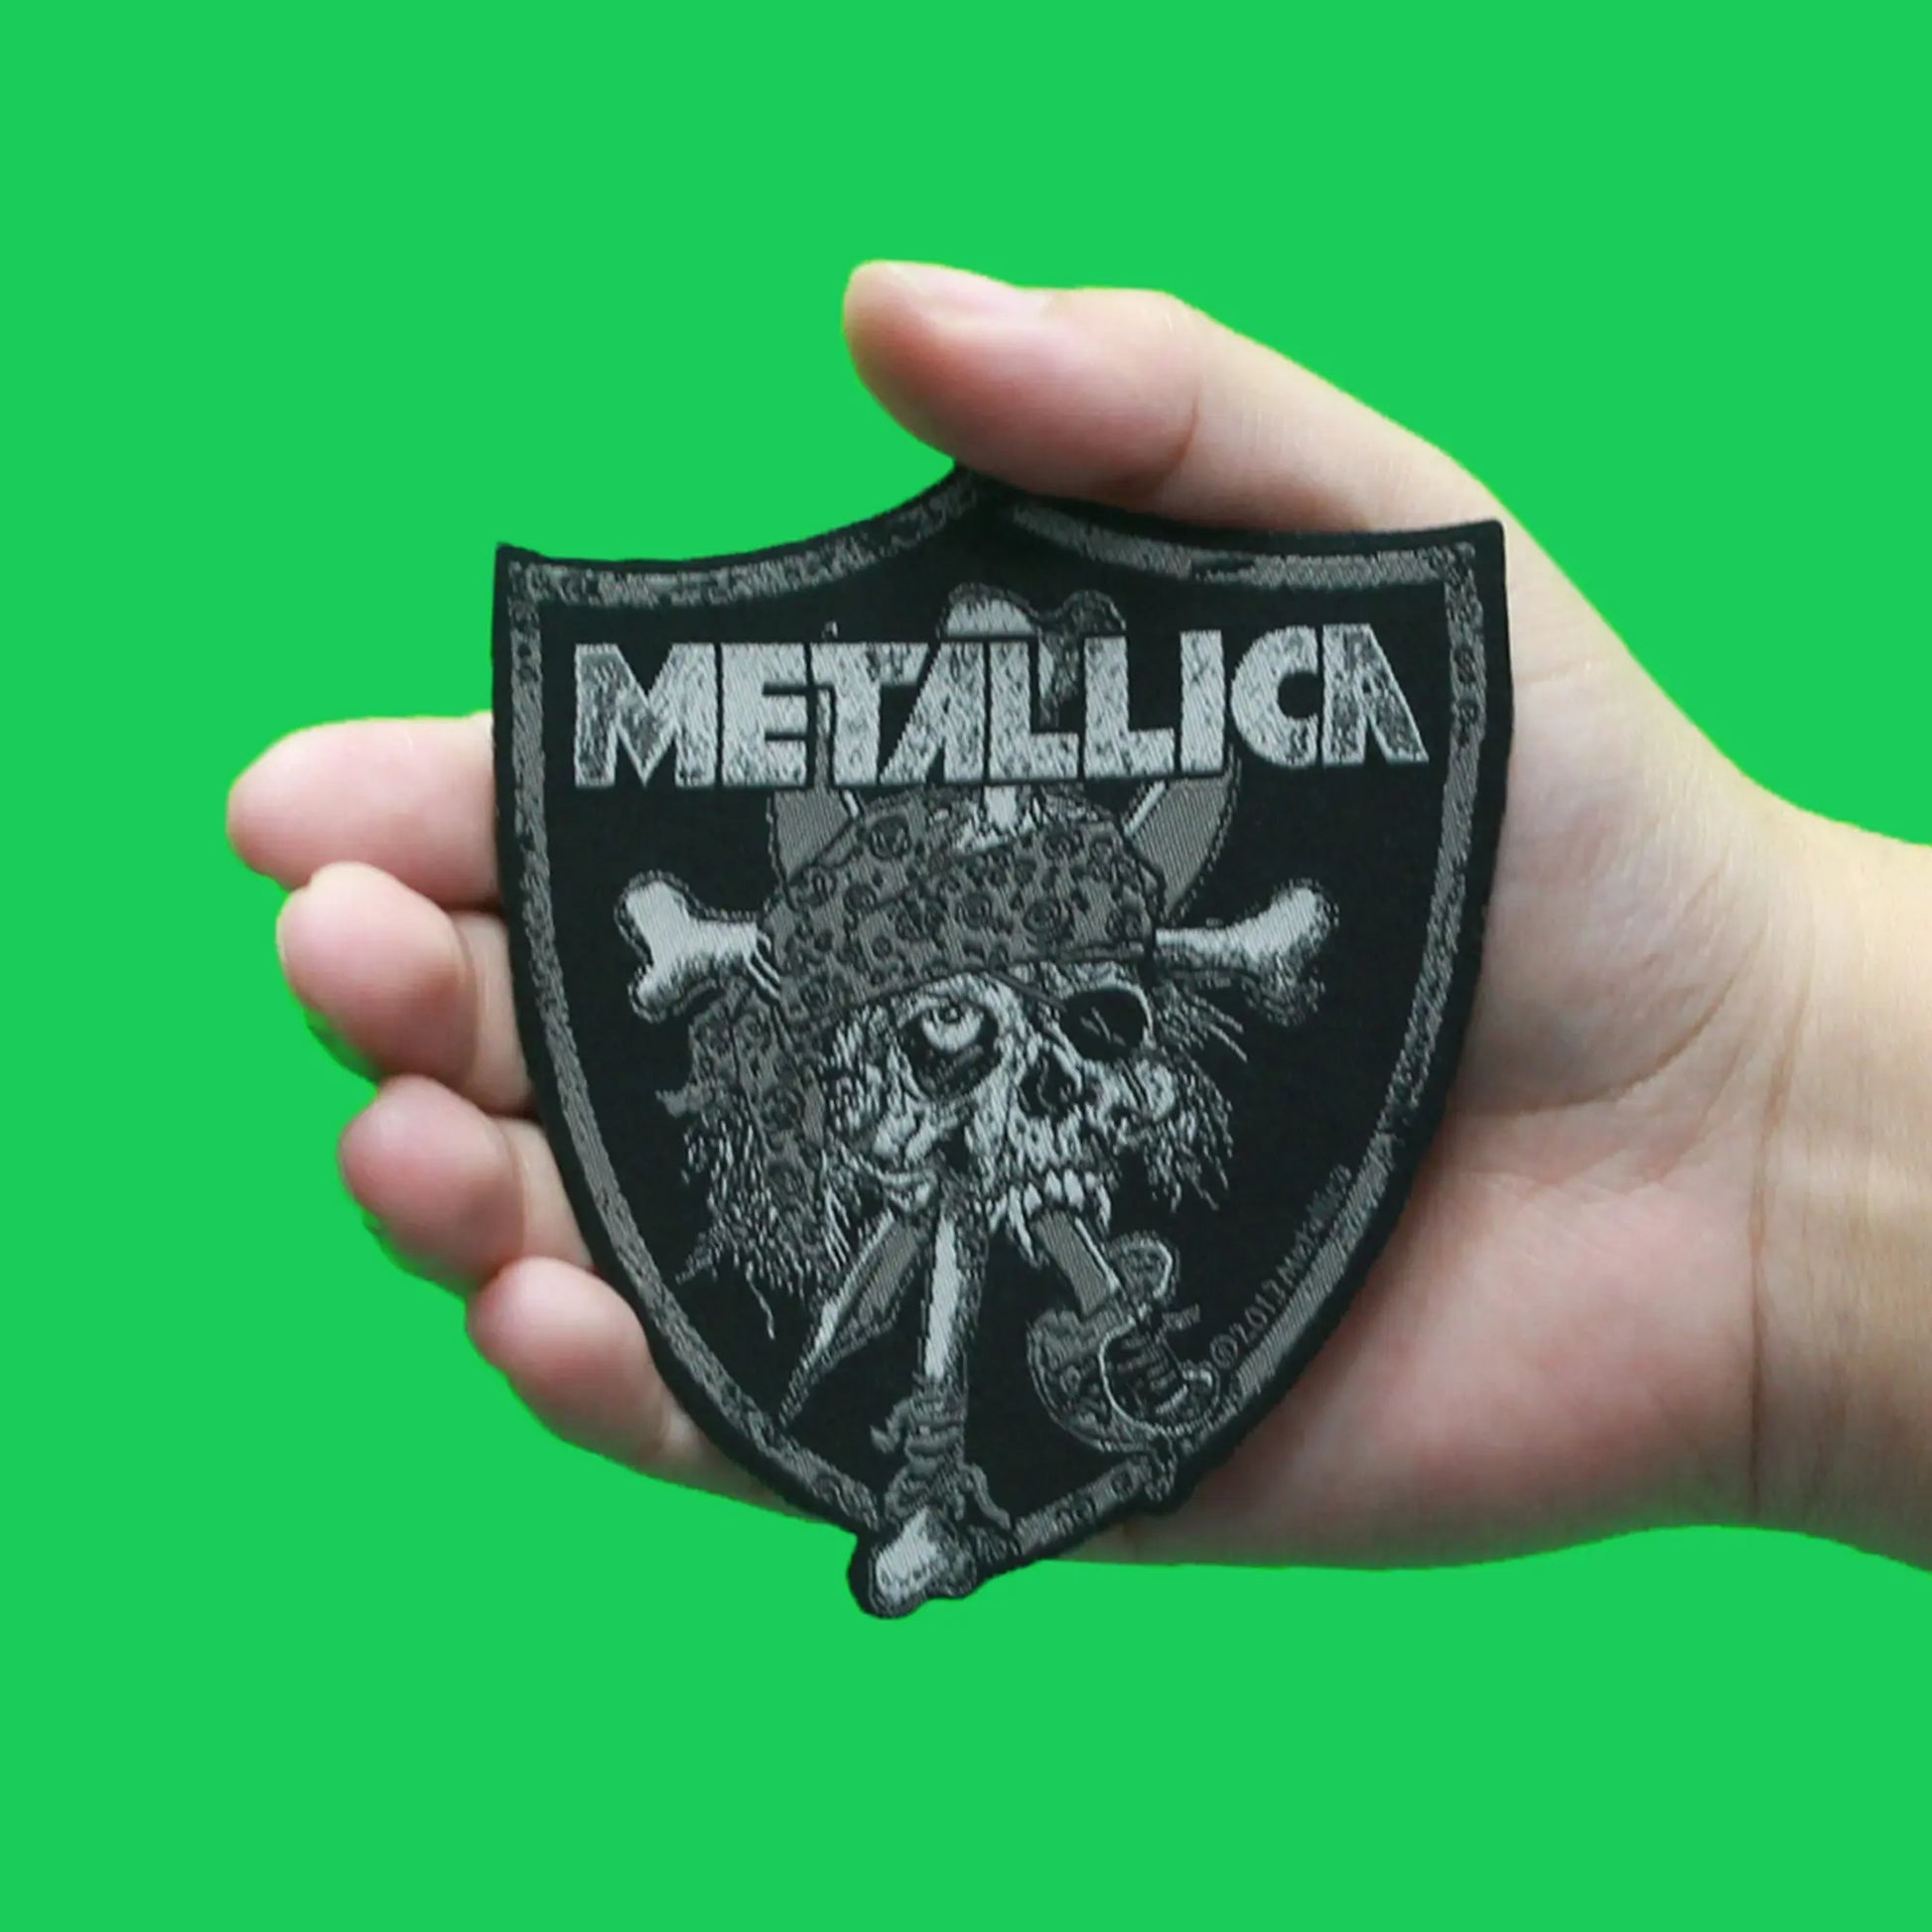 Metallica Raiders Skull Crest Patch Rock Metal Band Woven Iron On